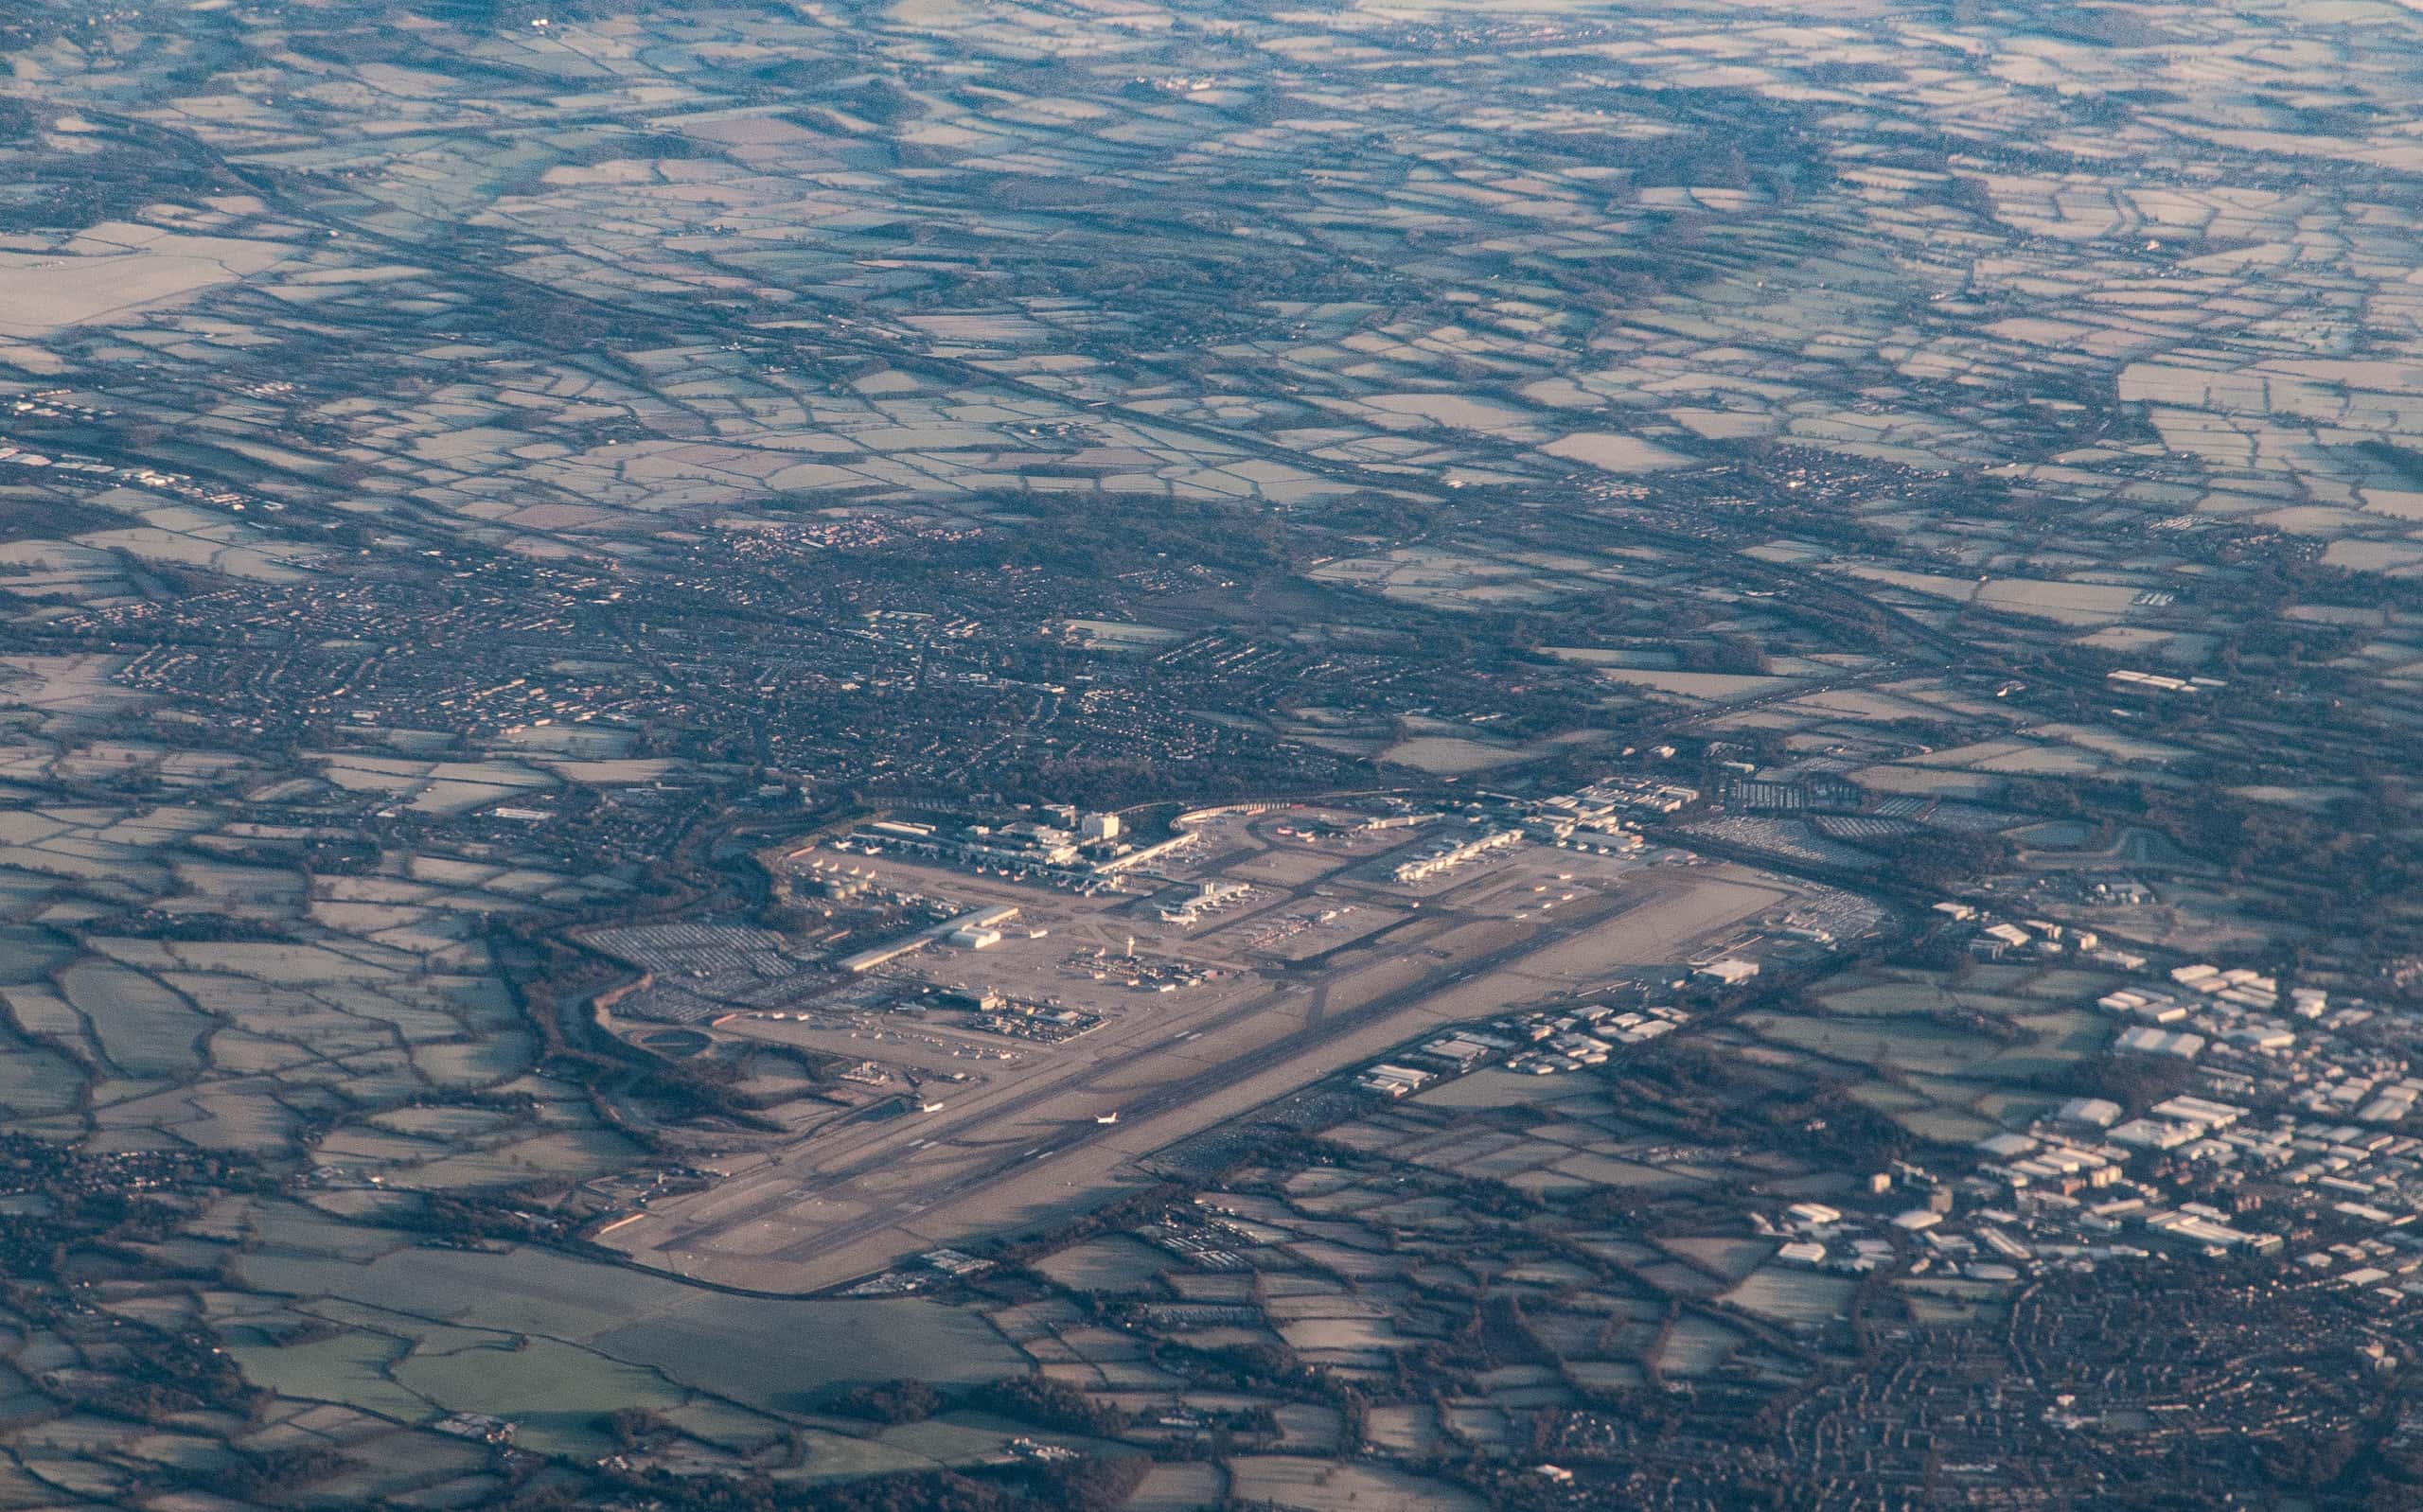 Aerial View of London Gatwick Airport (LGW) from the south west